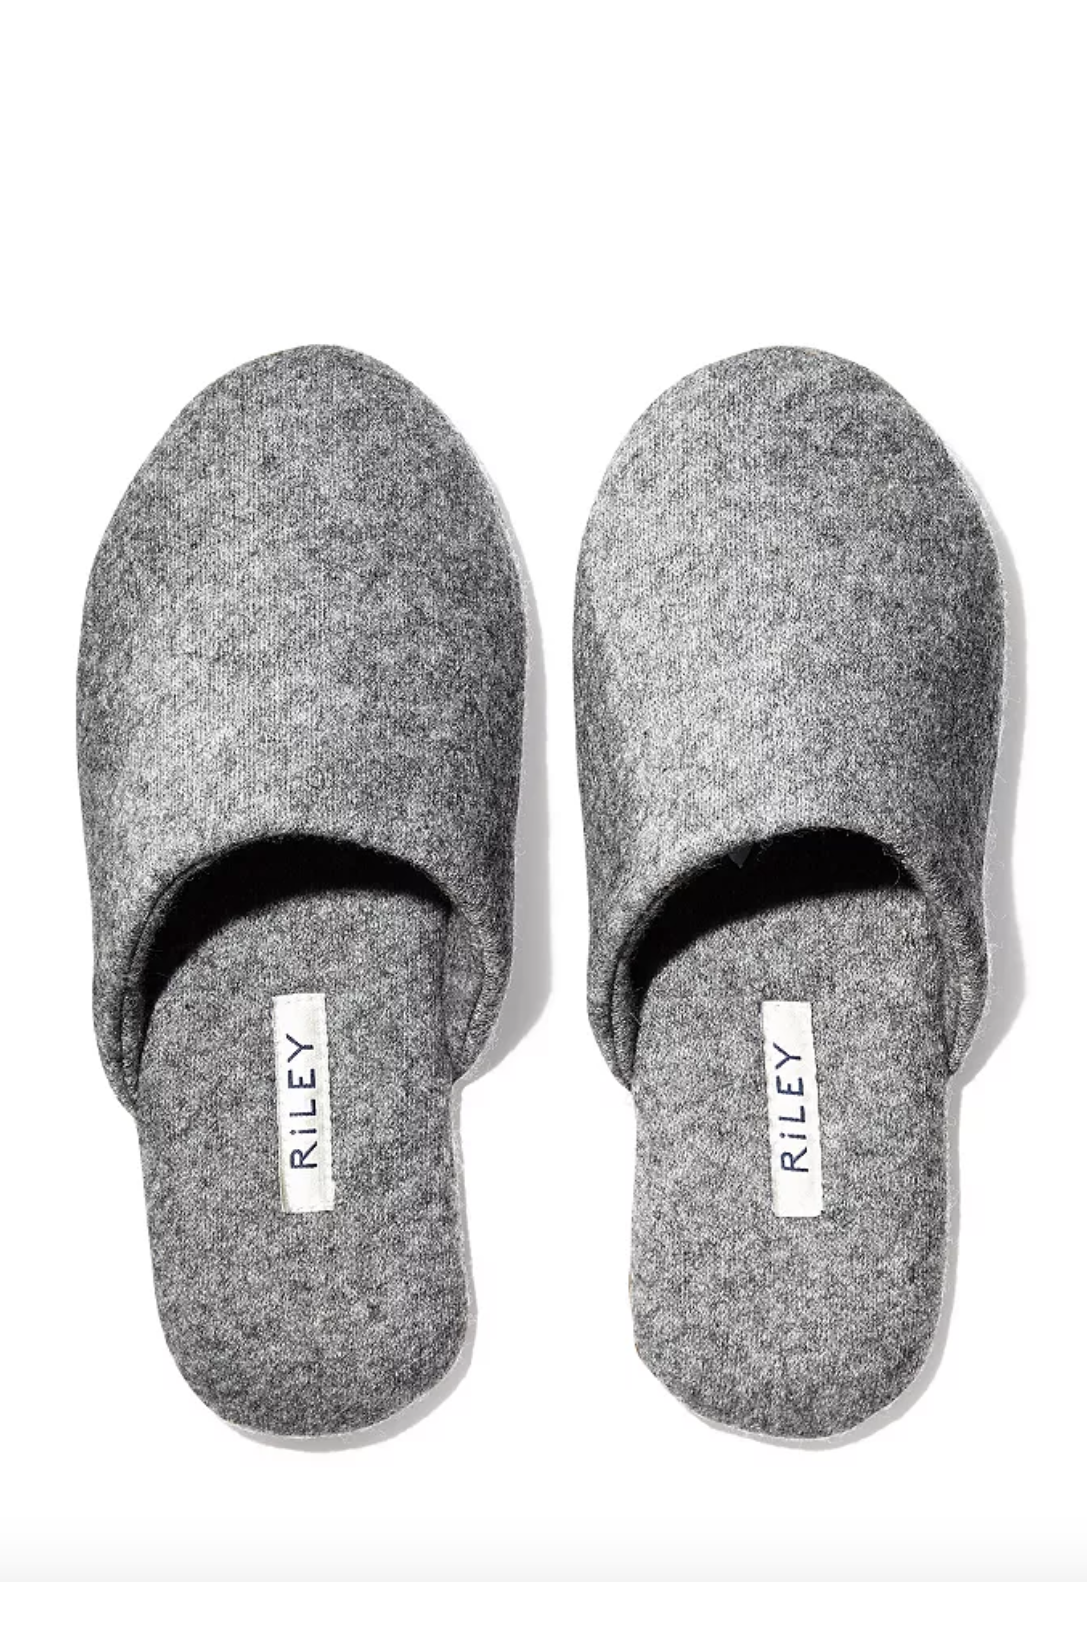 cute slippers for home